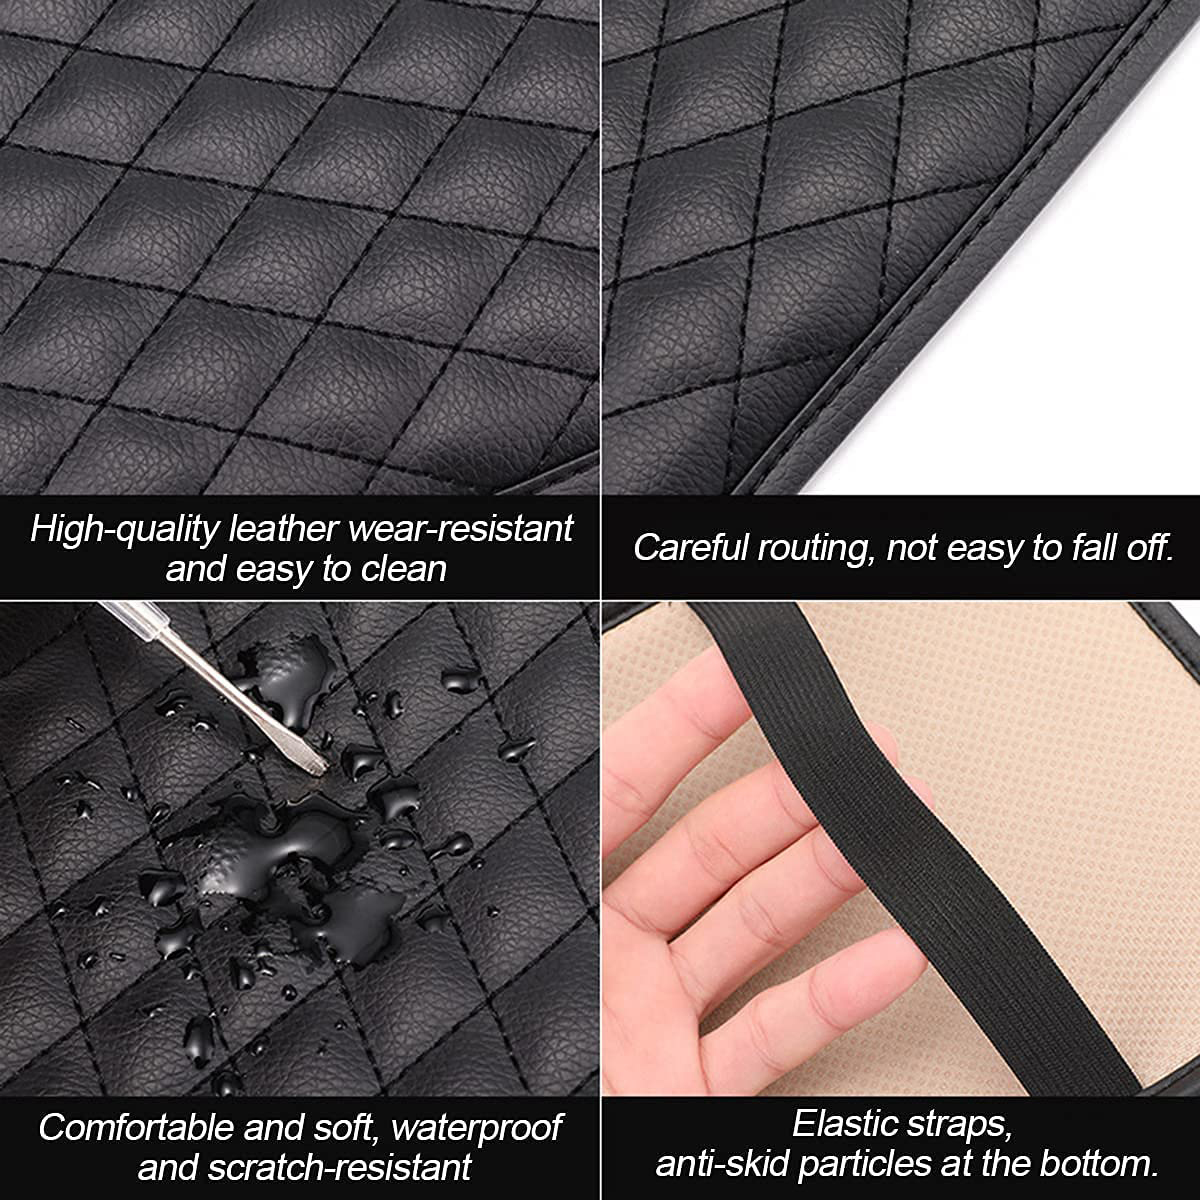 Car Armrest Cover Universal Car Armrest Pad Waterproof Car Center Console Cover 11.8 x 7.87 Inch Car Armrest Seat Box Cover Protector Car Decoration Accessories for Vehicle SUV Truck Car (Black) - image 5 of 8